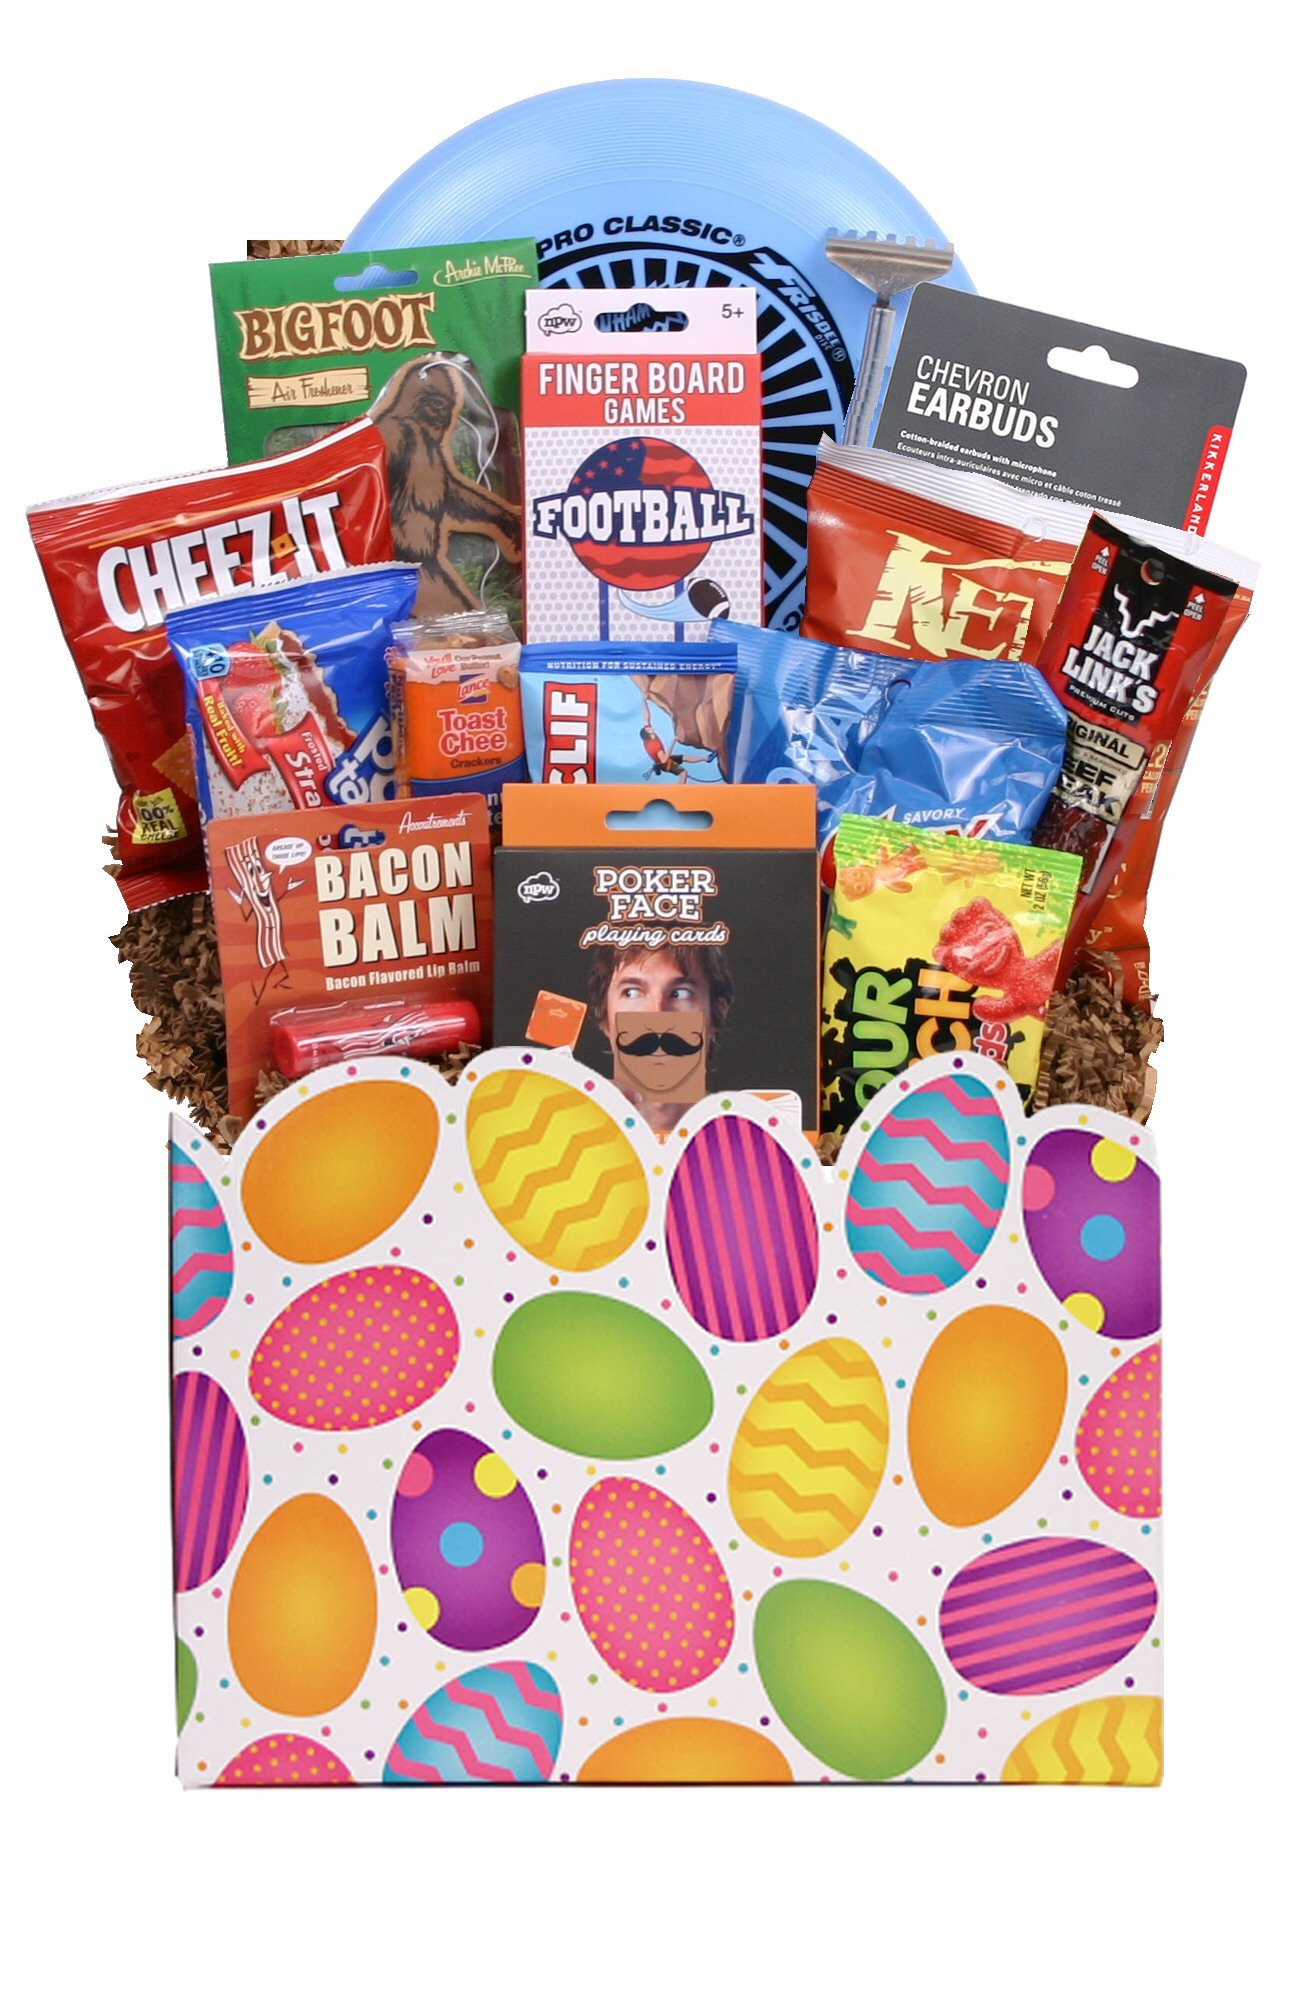 Easter Ideas For Tweens
 40 Awesome Easter Basket Stuffers for Tweens and Teens in 2018